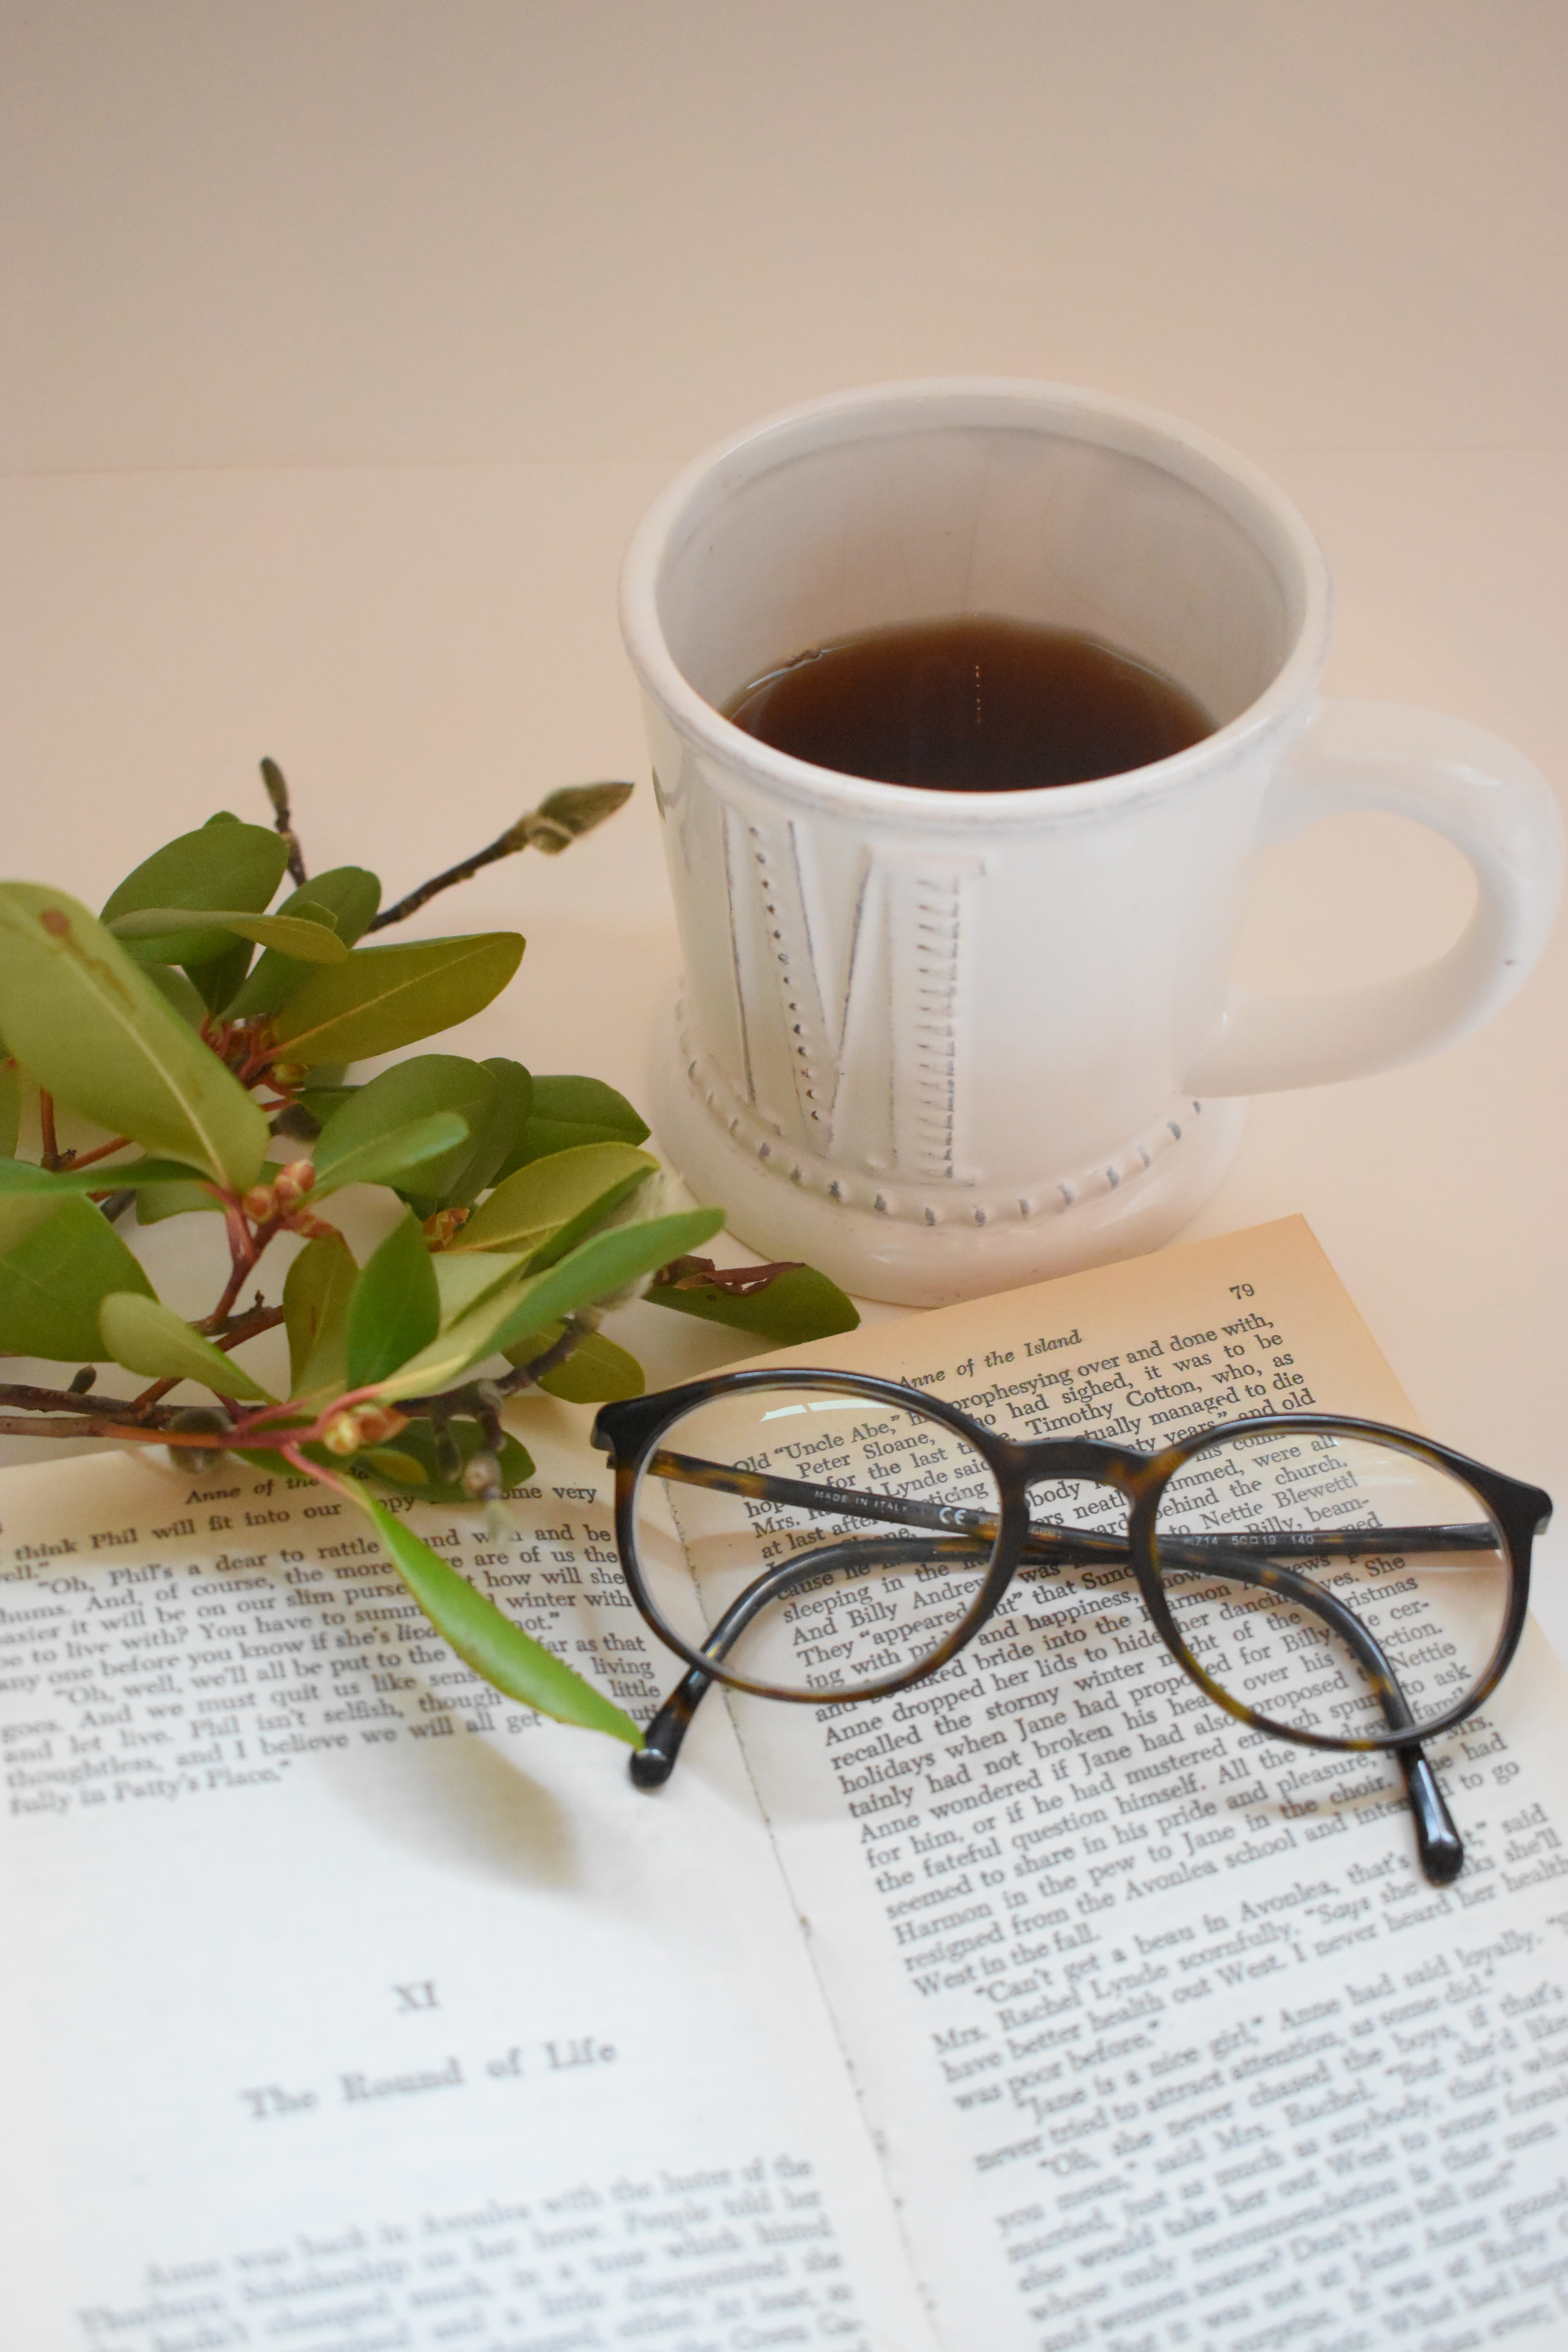 Download background spectacles, miscellanea, miscellaneous, cup, book, glasses